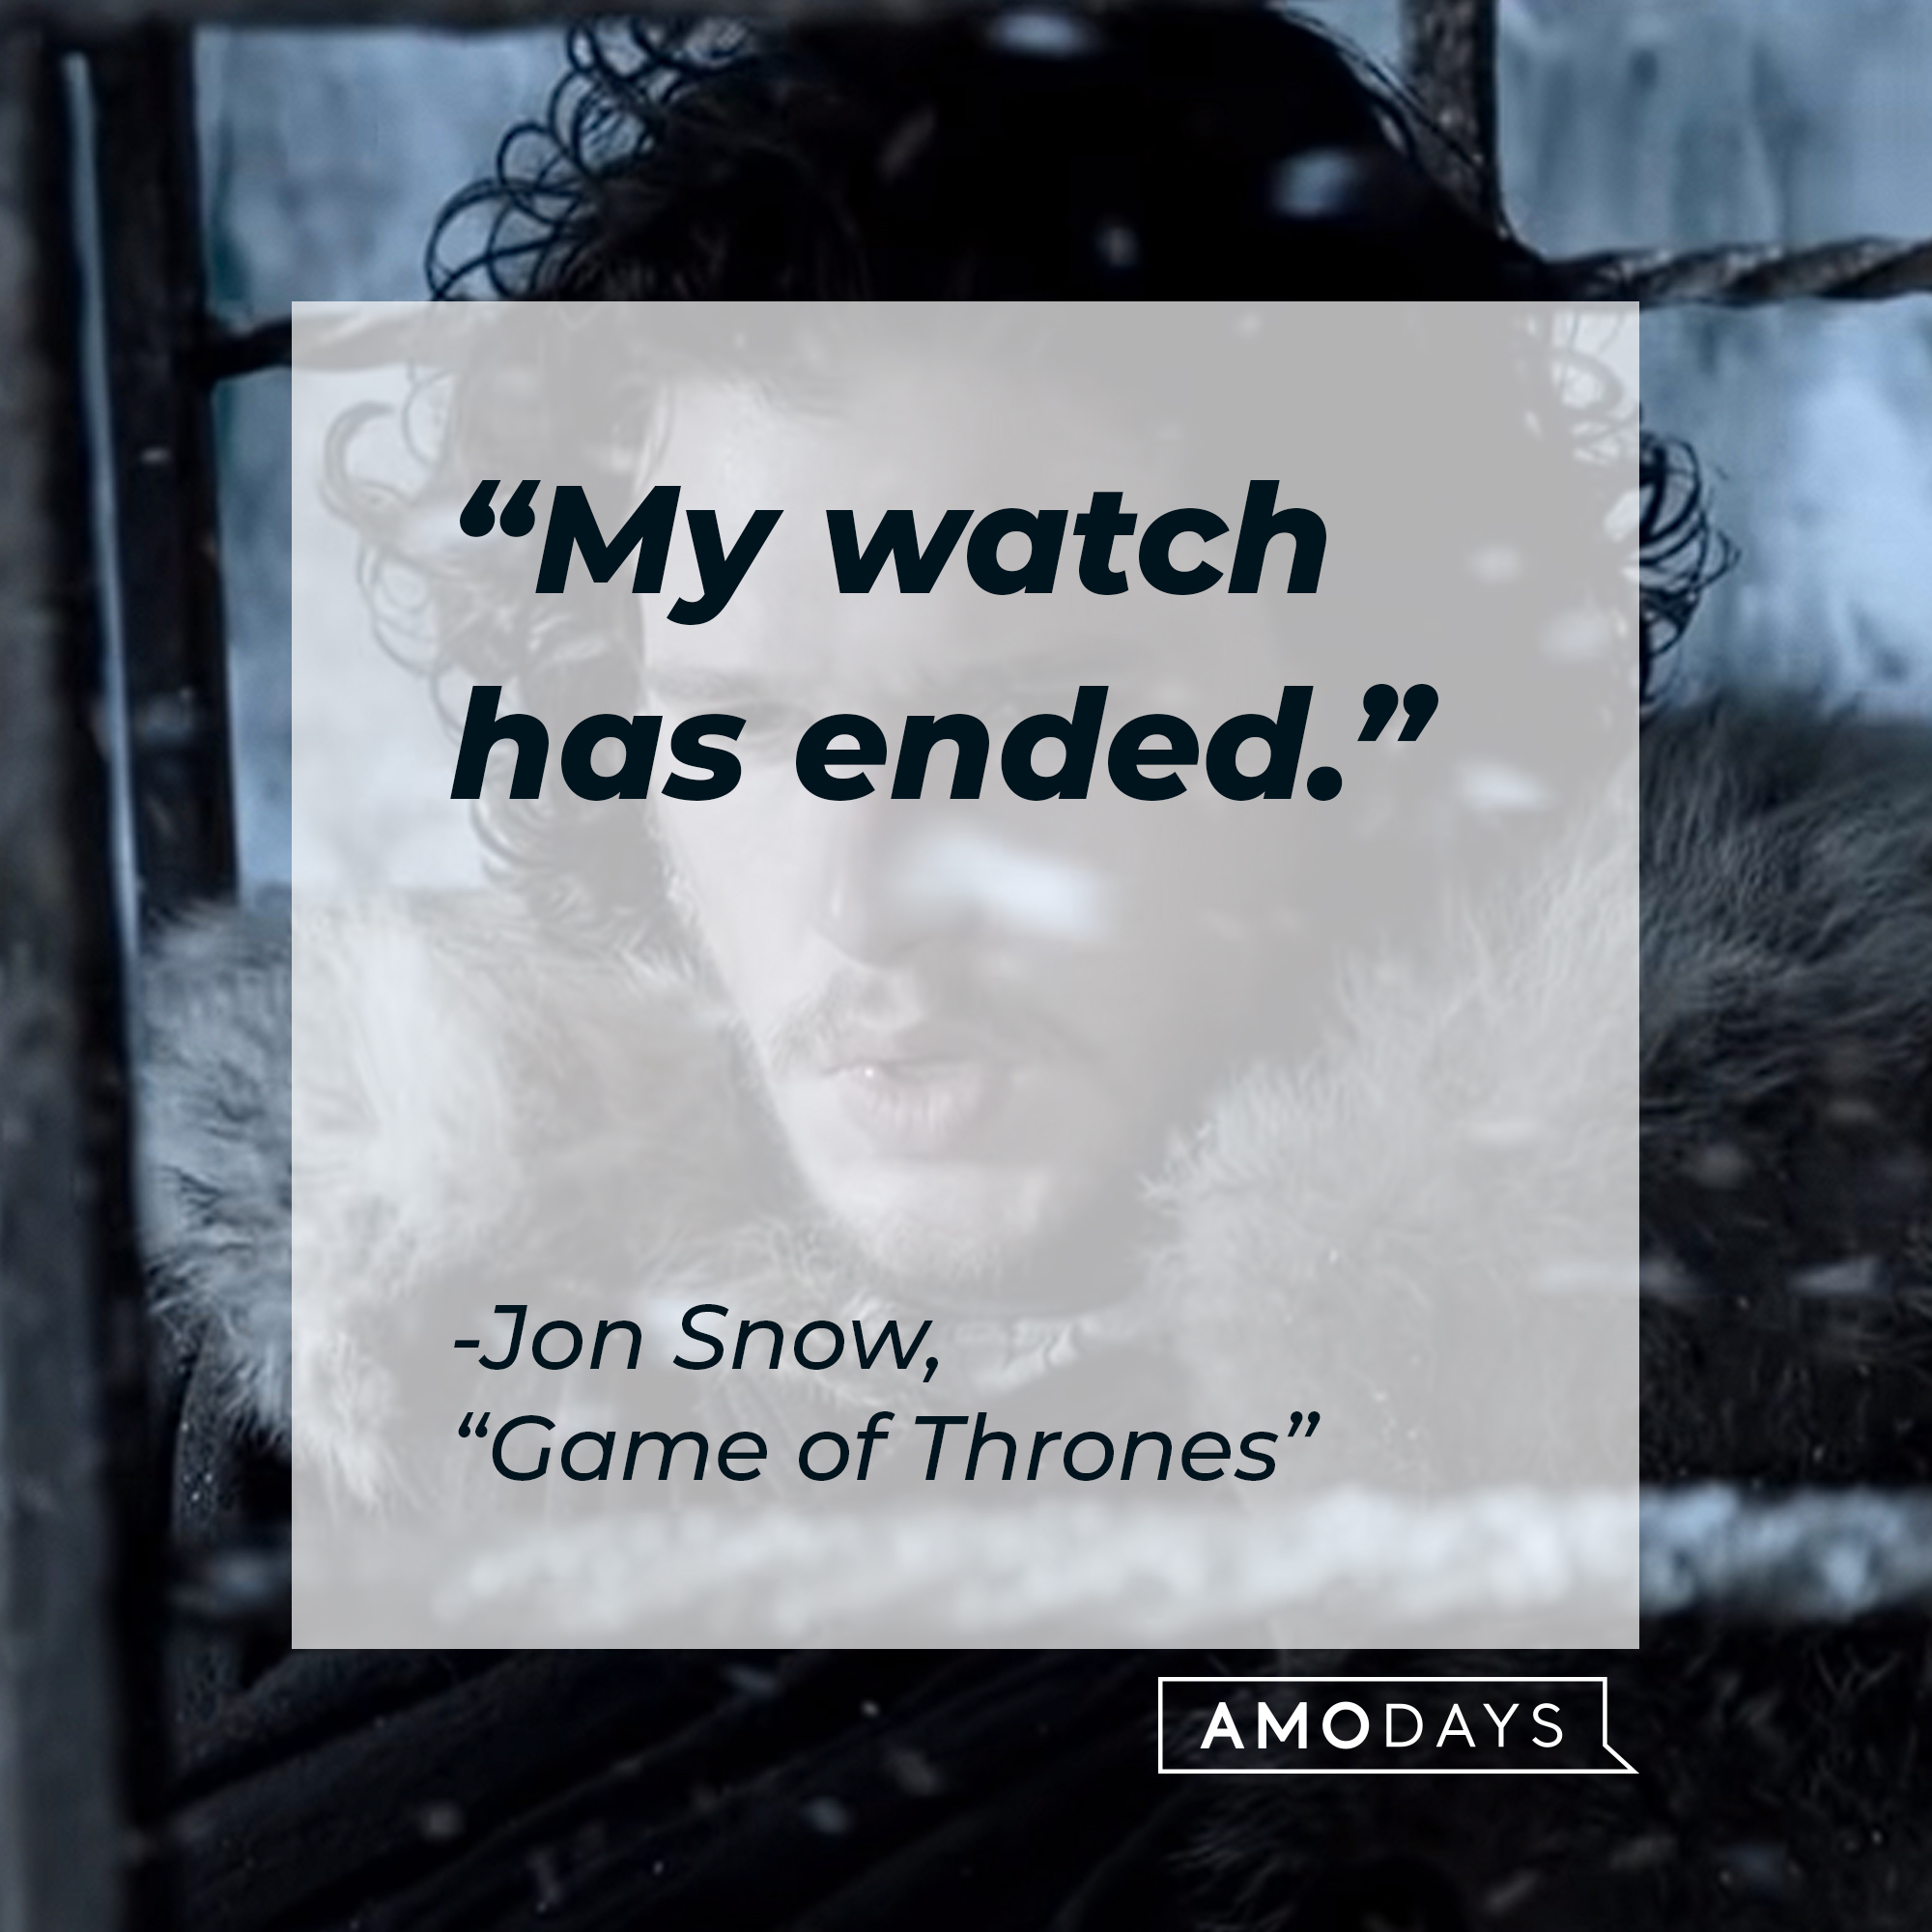 A photo of Jon Snow with the quote, "My watch has ended." | Source: YouTube/gameofthrones